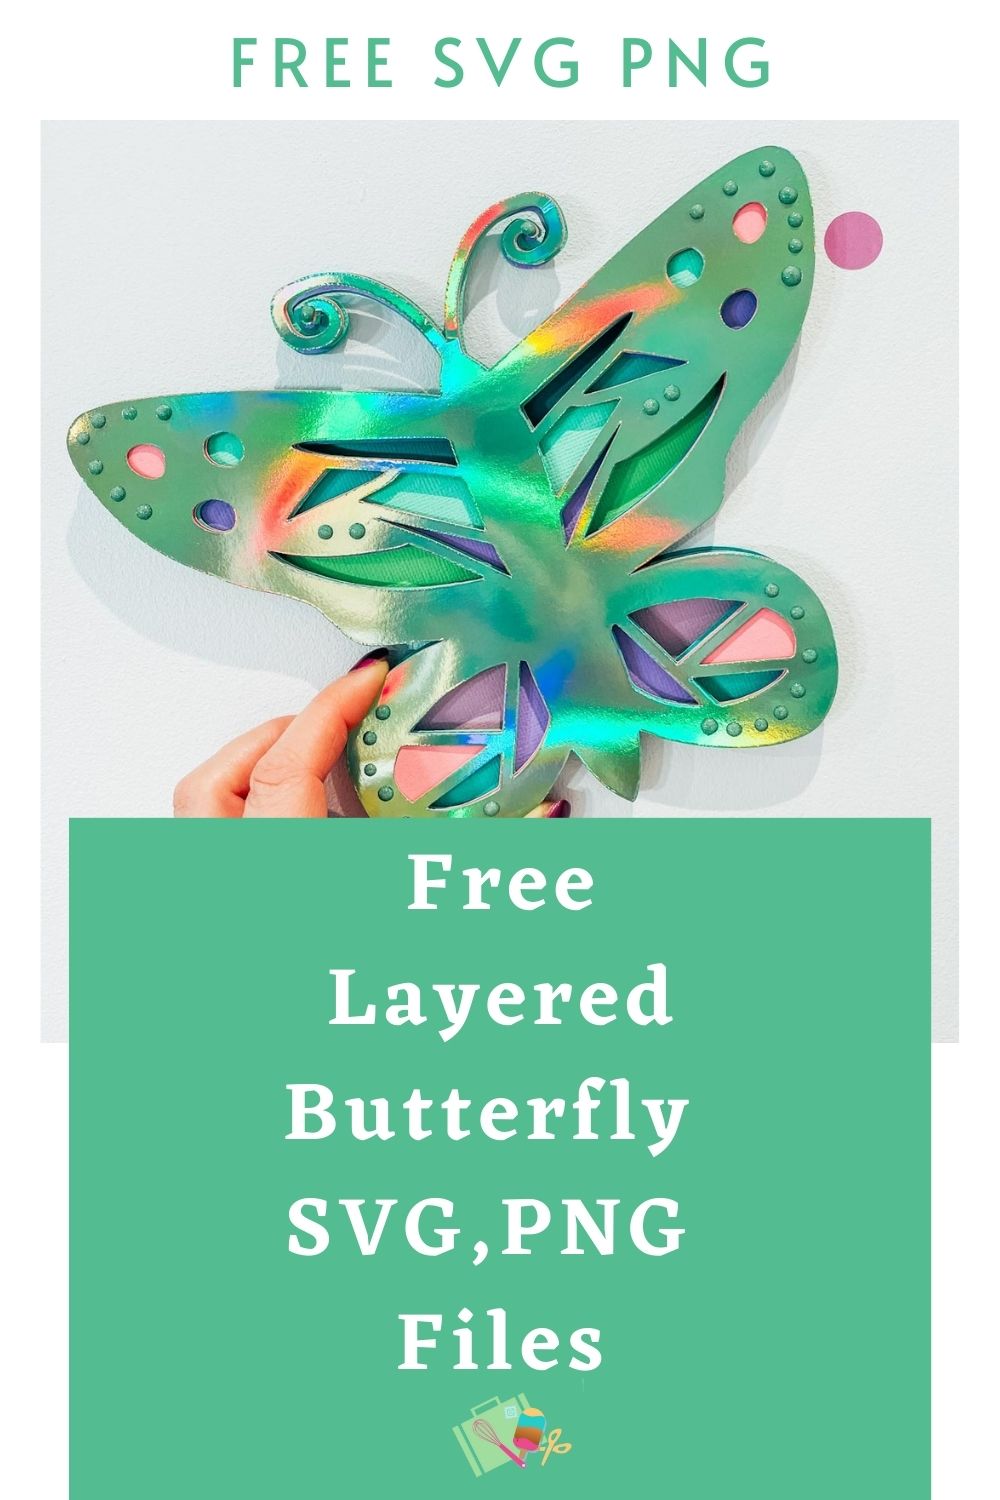 Free Layered Butterfly SVG, PNG Files for Cricut, Silhouette and Glowforge